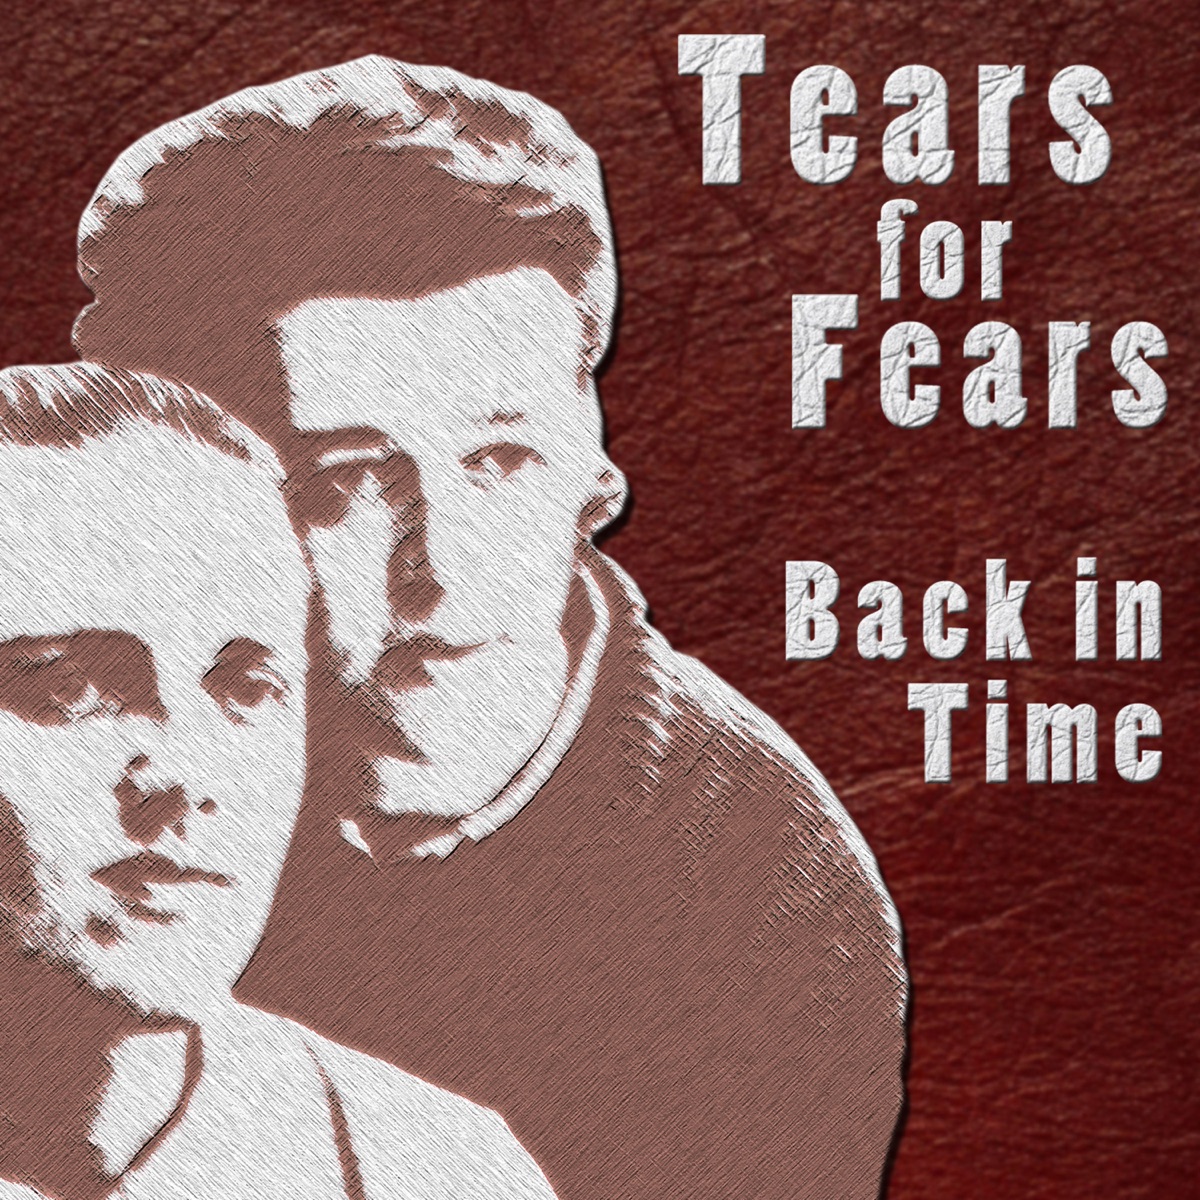 Rule the World: The Greatest Hits by Tears for Fears (Compilation